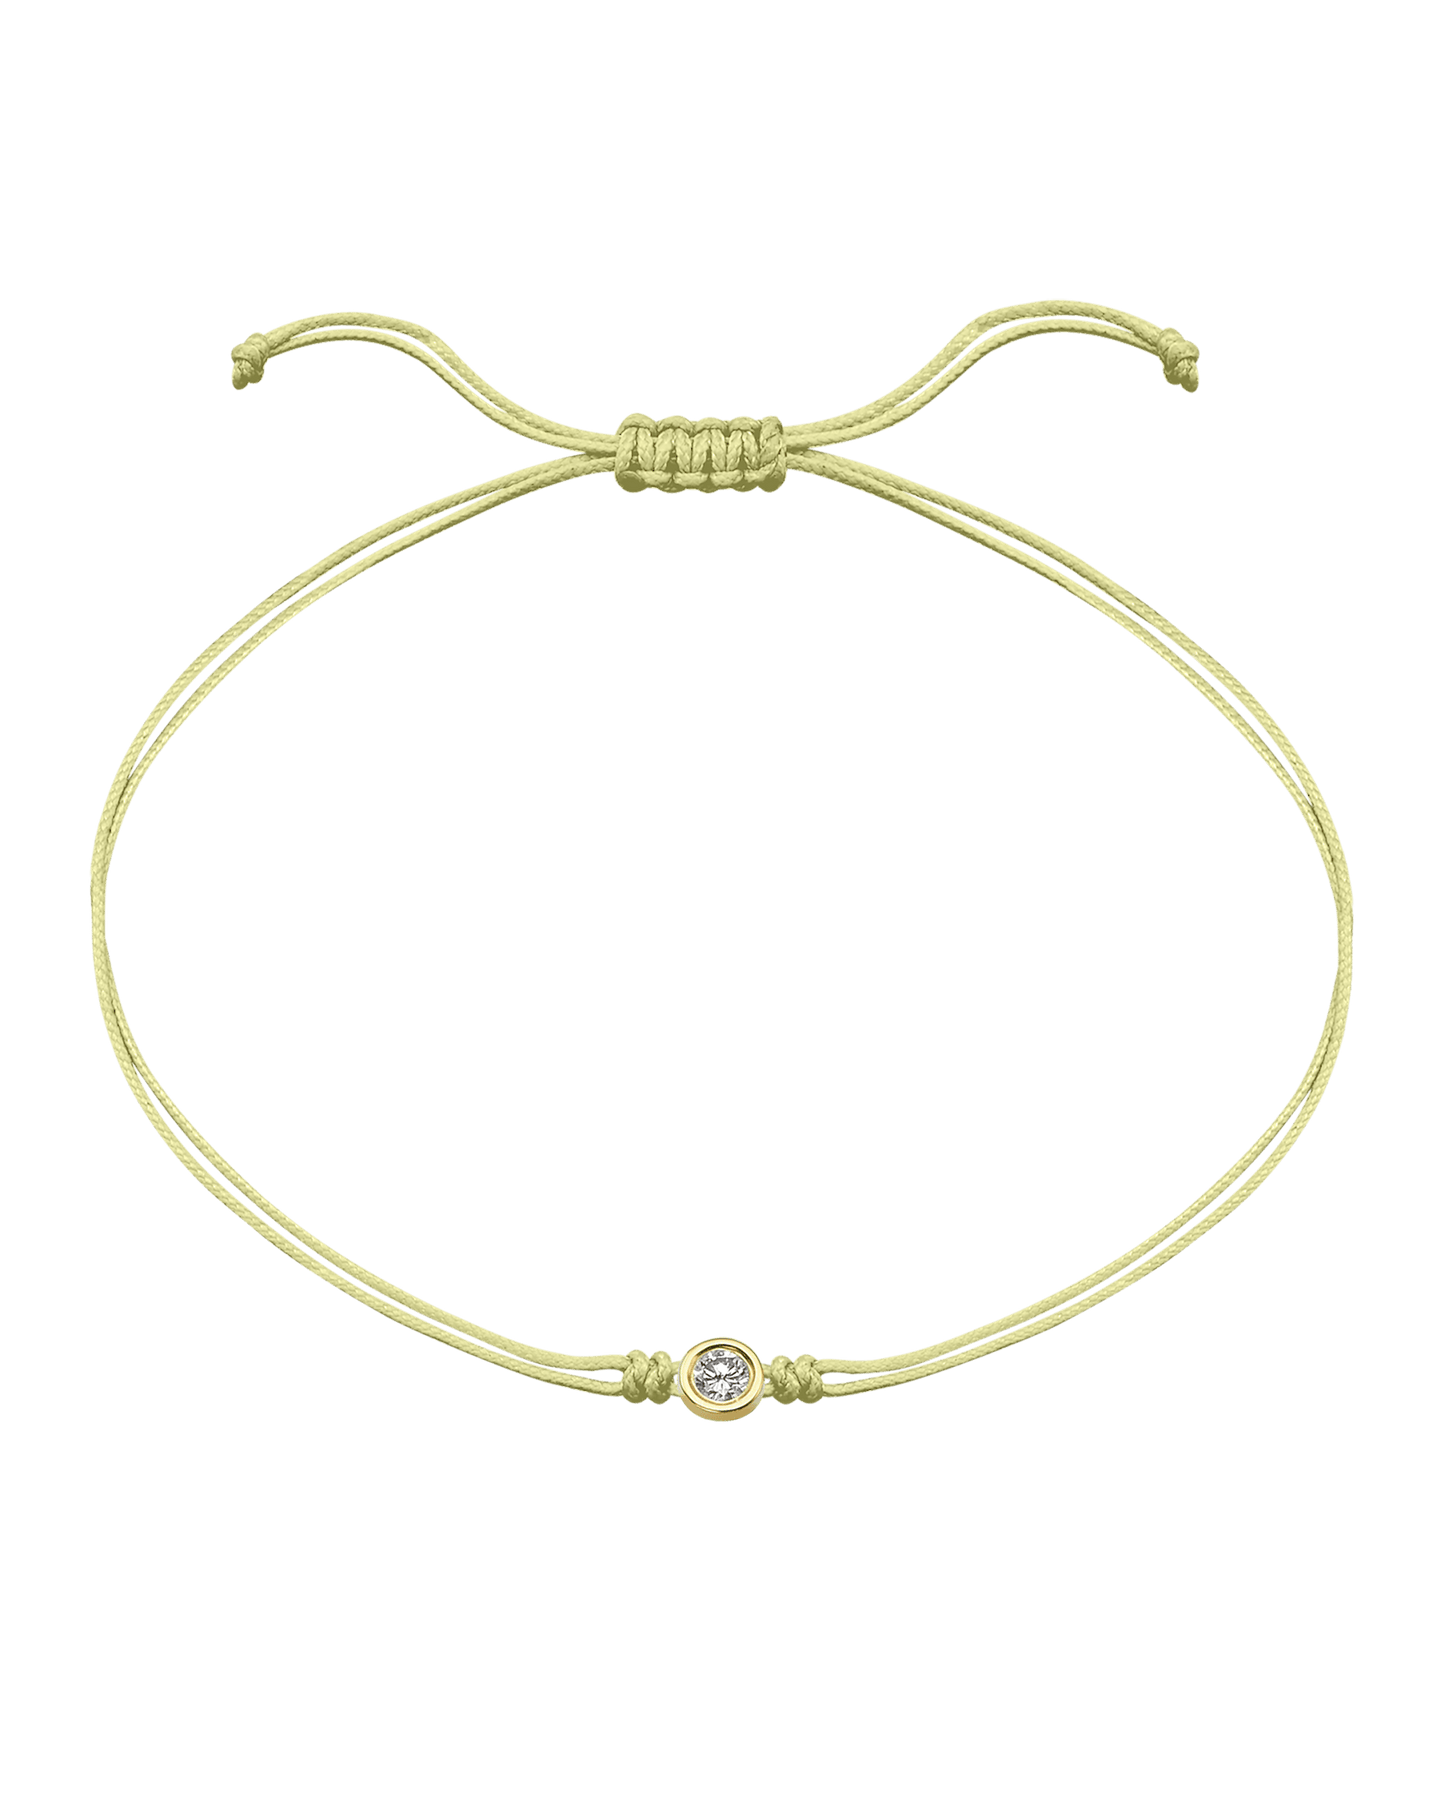 Summer Edition : The Classic String of Love - 14K Yellow Gold Bracelets magal-dev Tropical Cosmopolitan - Light Yellow Large: 0.10ct 